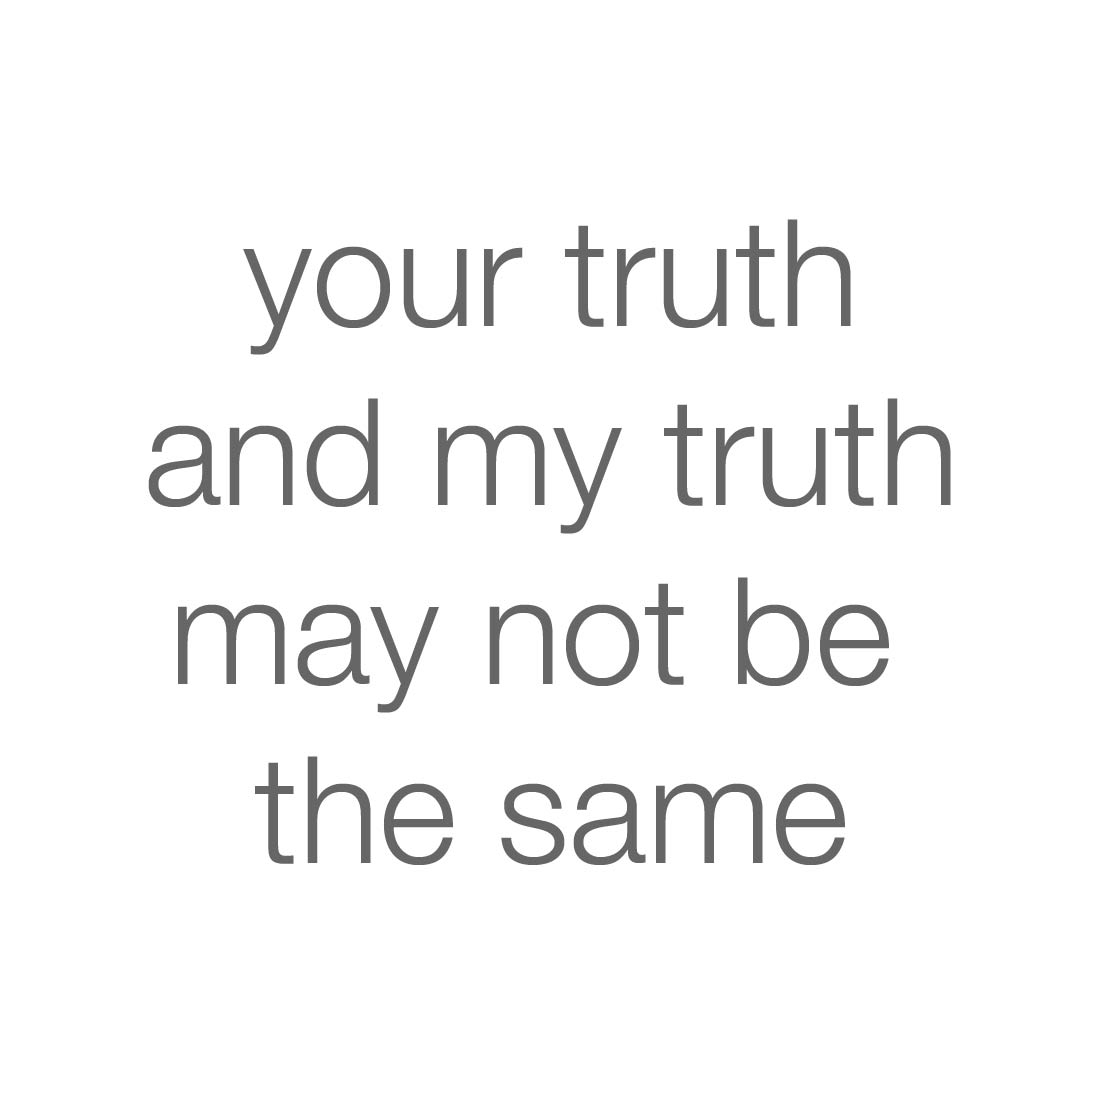 your truth and my truth may not be the same